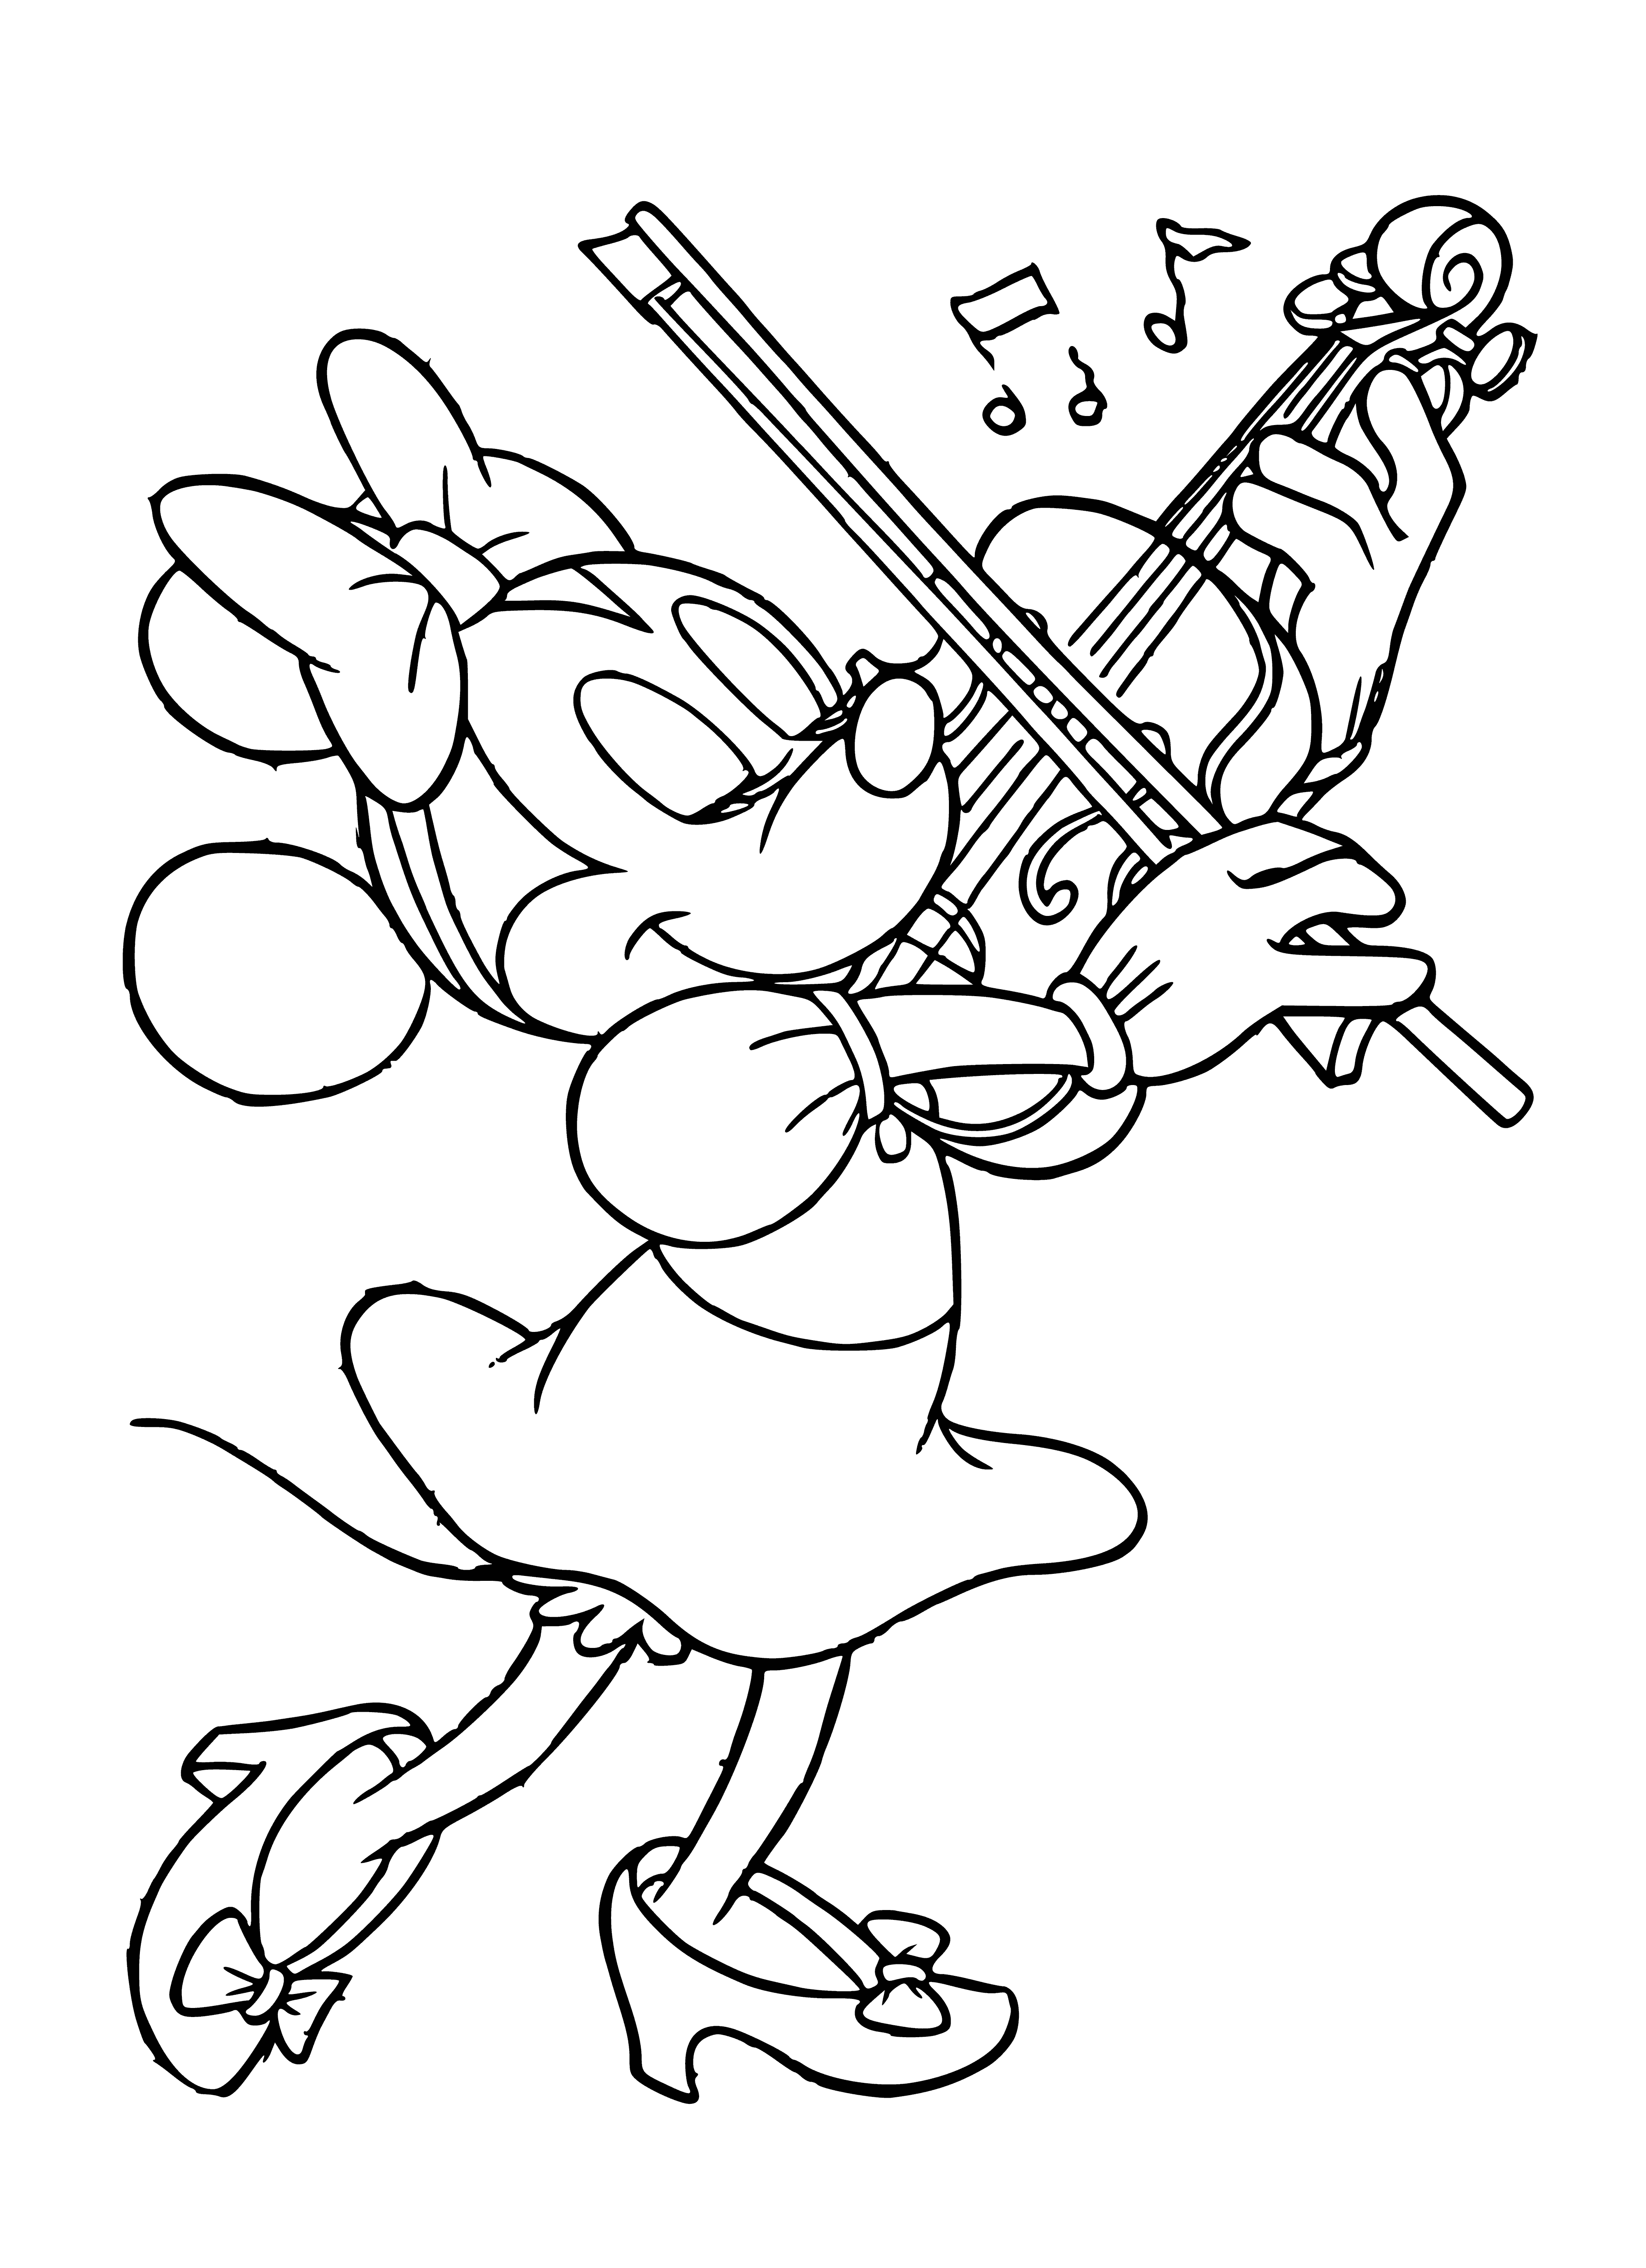 coloring page: with a happy expression on his face.

Cartoon of guy playing violin with mouse helping; he's happy & it's so cute! #cartoon #violin #mouse